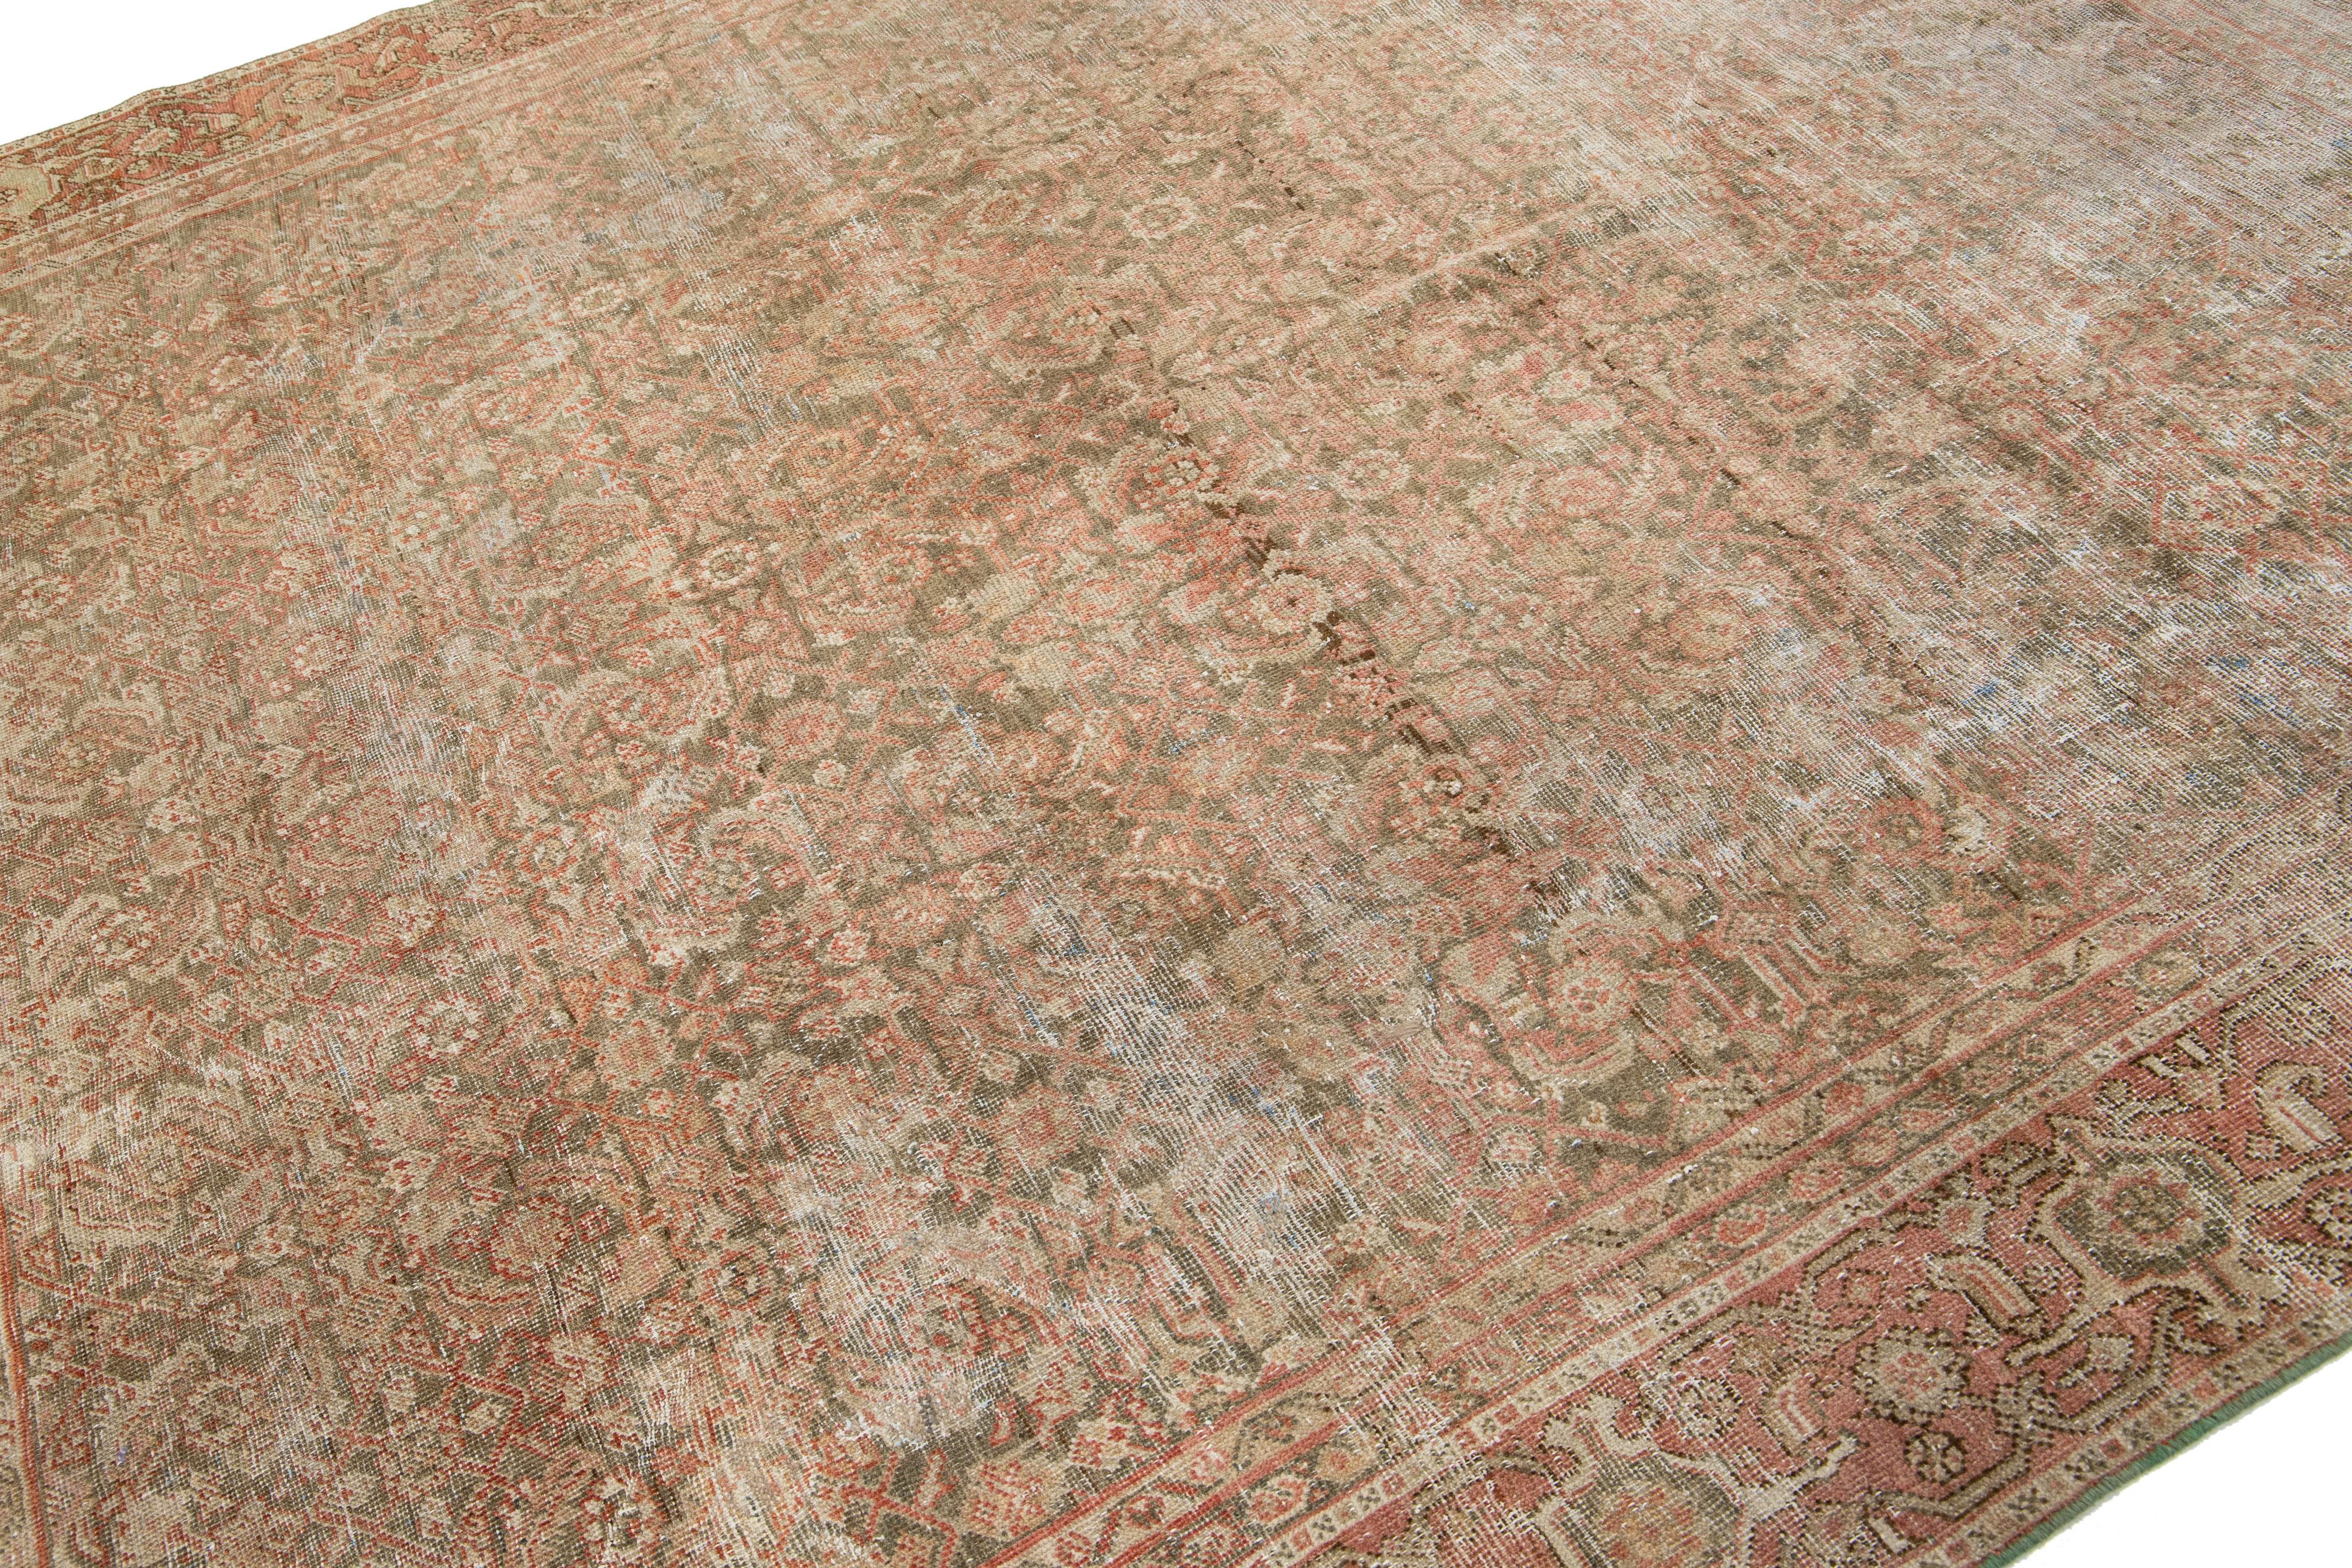 Hand-Knotted Antique Persian Tabriz Wool Rug with Rust Allover Design from the 1910s For Sale